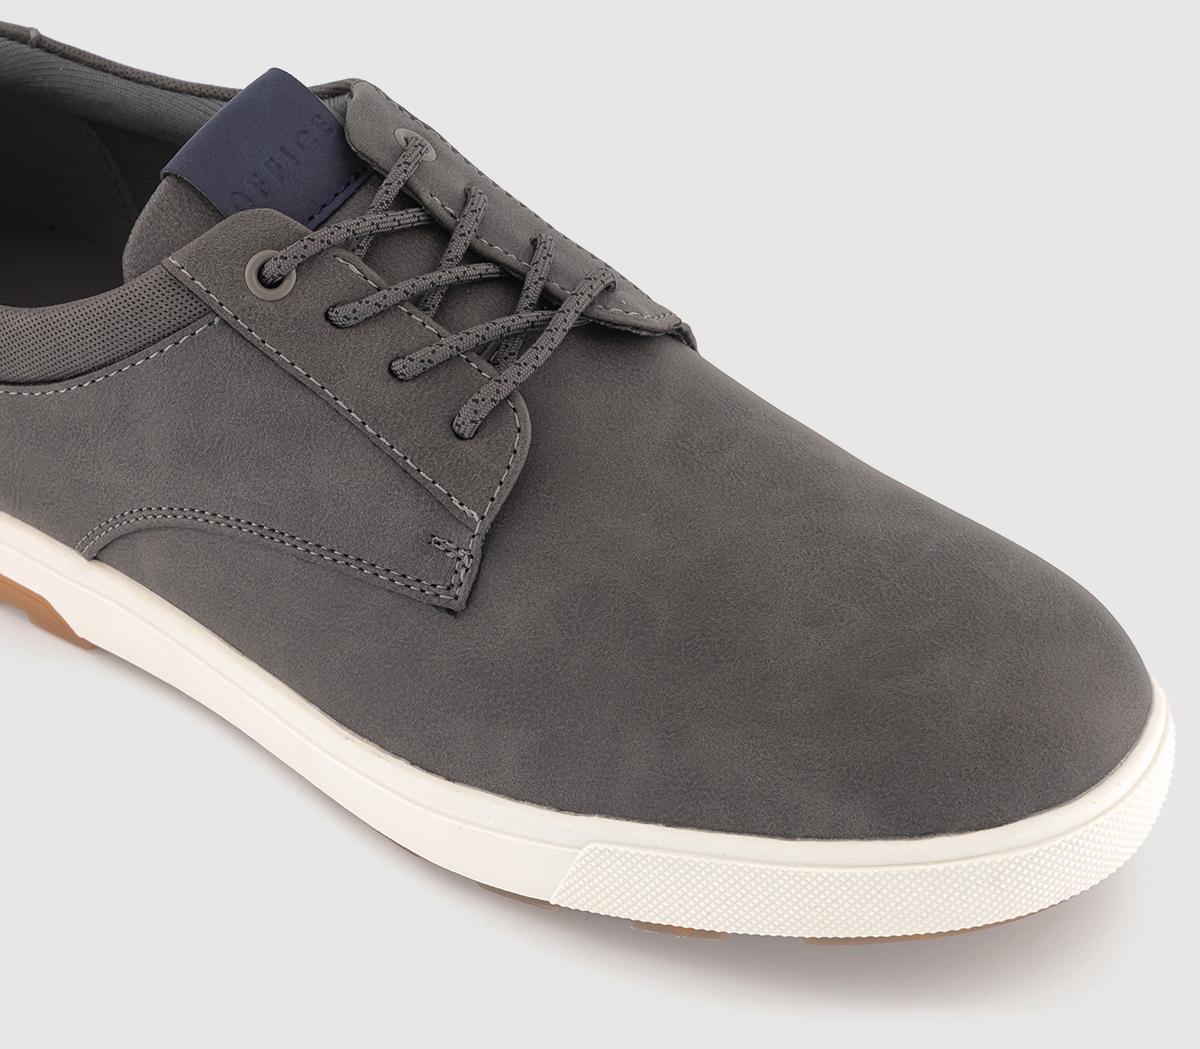 OFFICE Cannock Lace Up Shoes Dark Grey - Men's Casual Shoes